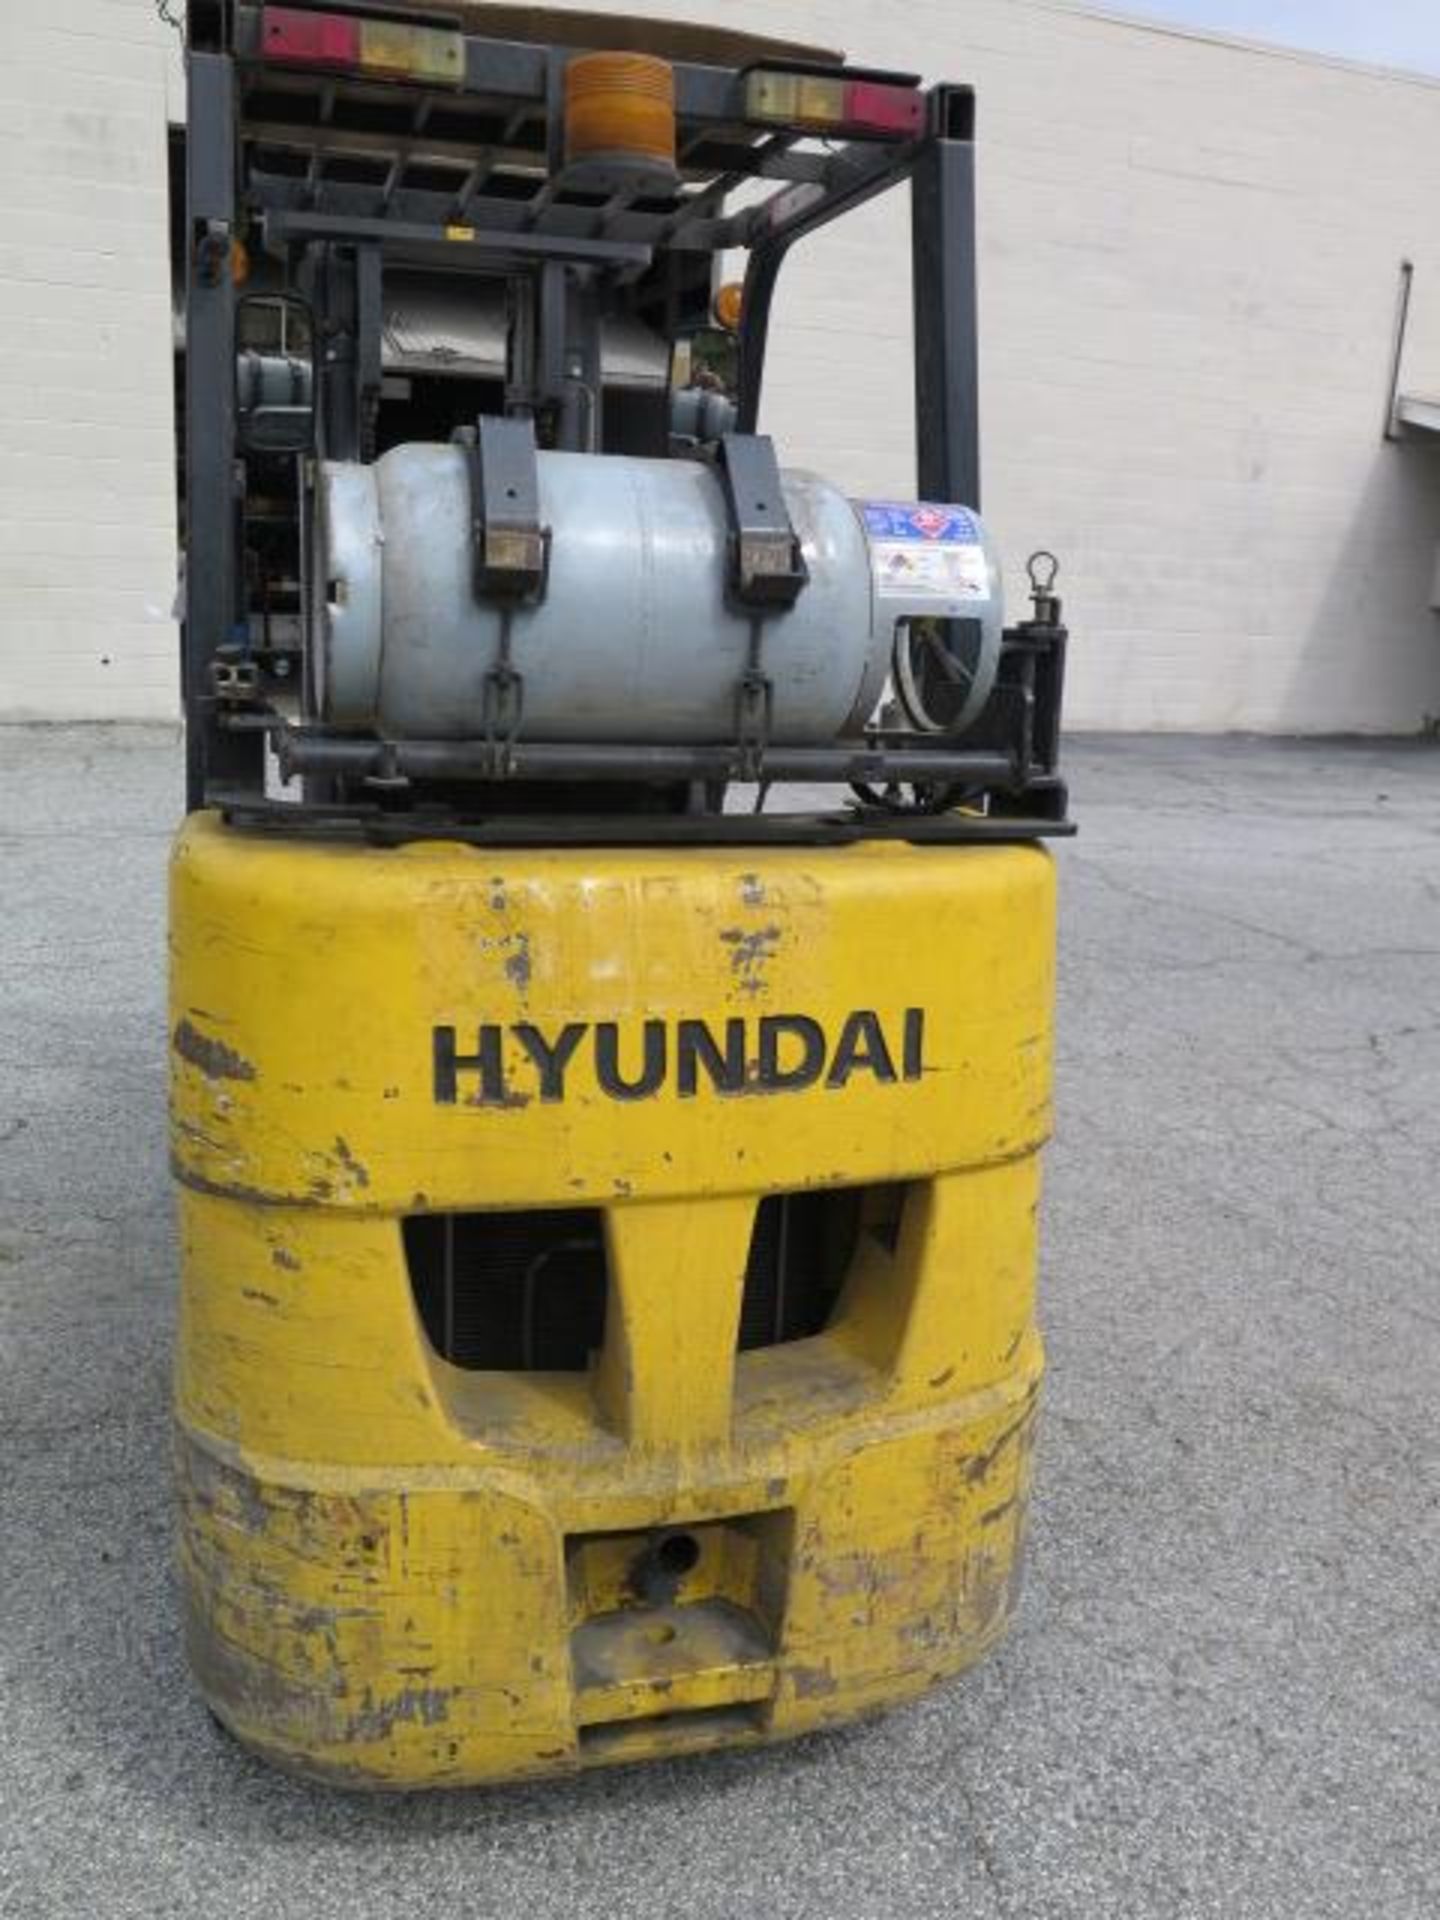 Hyundai 25LC-7 4680 Lb LPG Forklift s/n HC0210054 w/ 3-Stage, 185” Lift, Side Shift, SOLD AS IS - Bild 2 aus 19